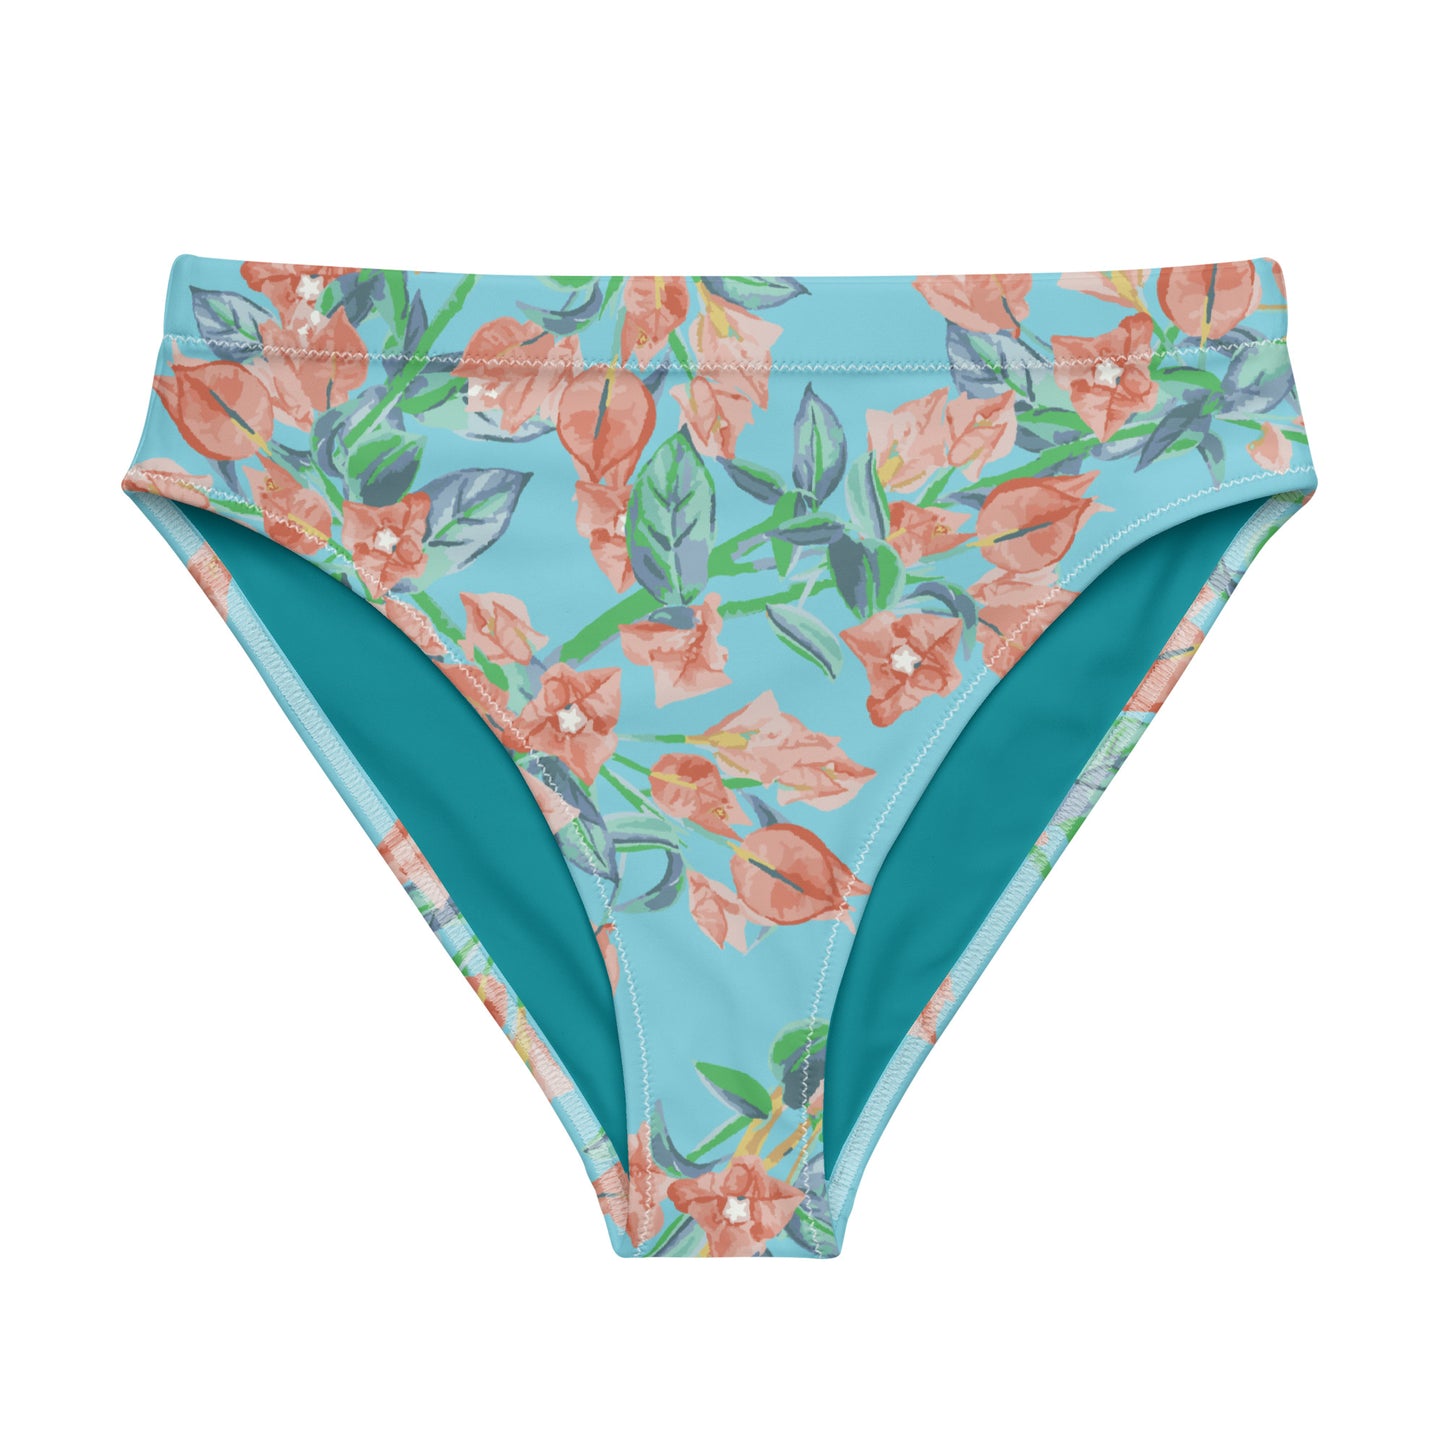 Bougainvillea Springs Sky Blue and Coral Recycled High-Waisted Bikini Bottom